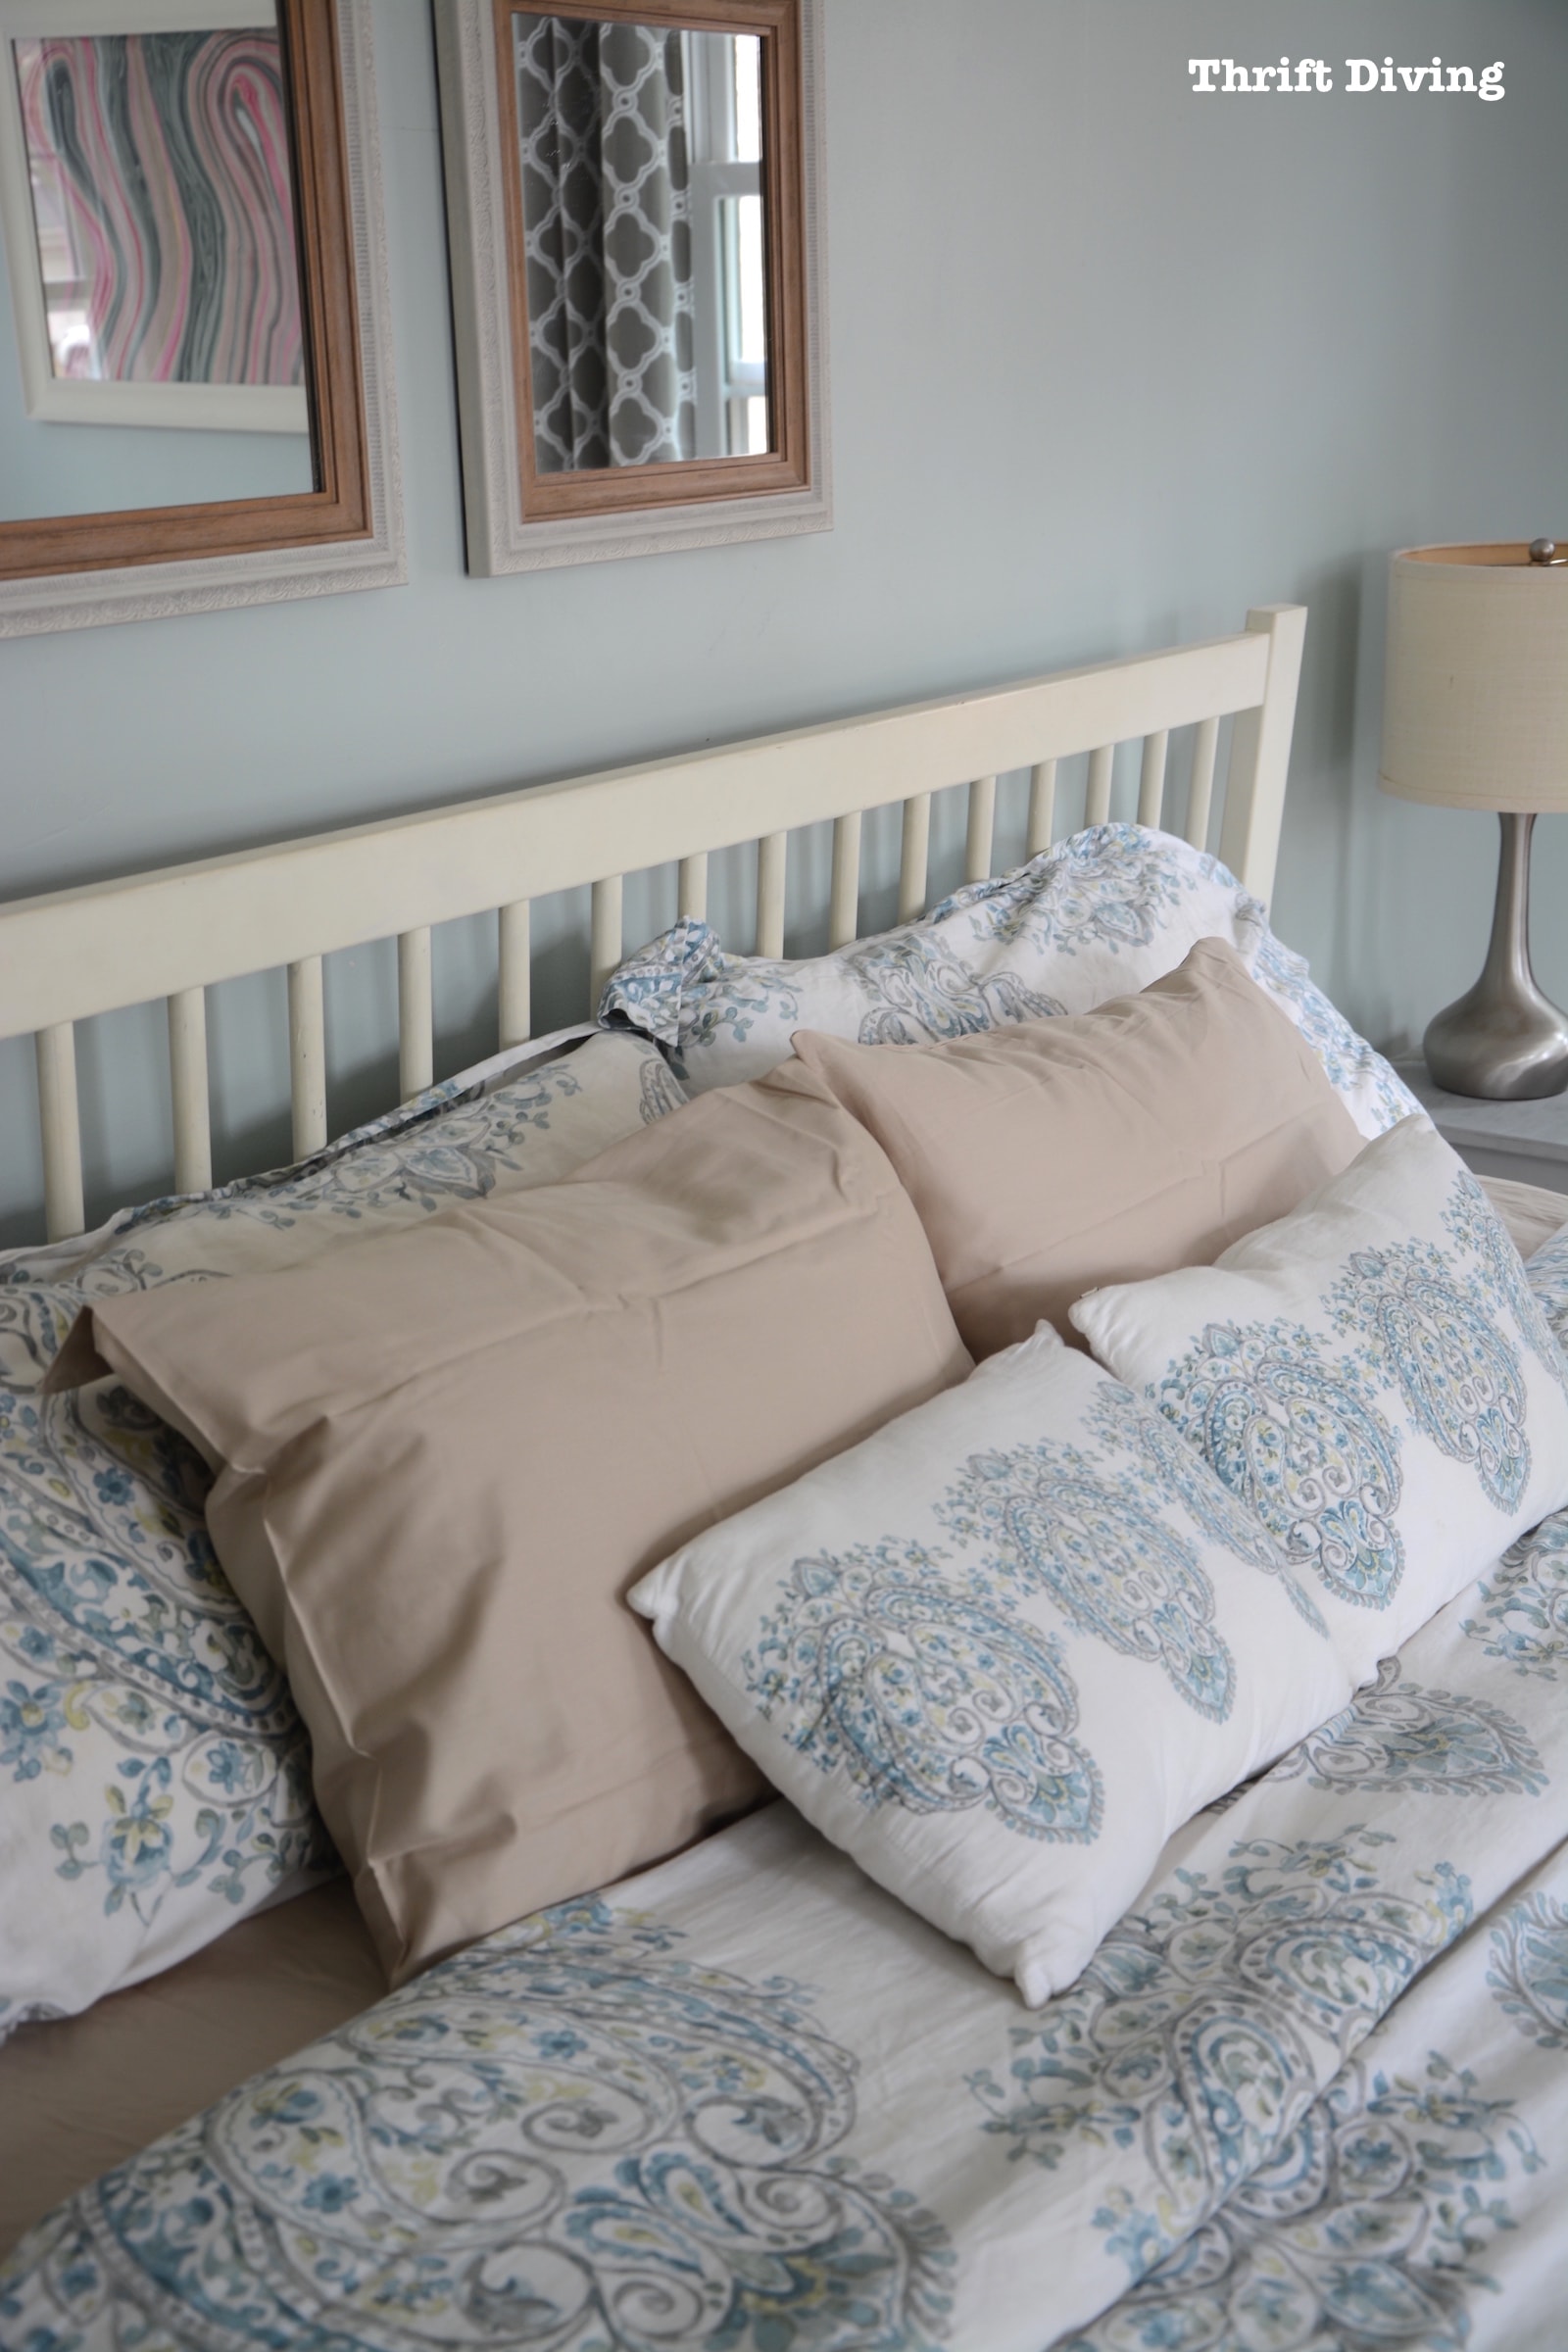 Are Brentwood pillows worth it? A Brentwood Home pillows review. - AFTER - Thrift Diving